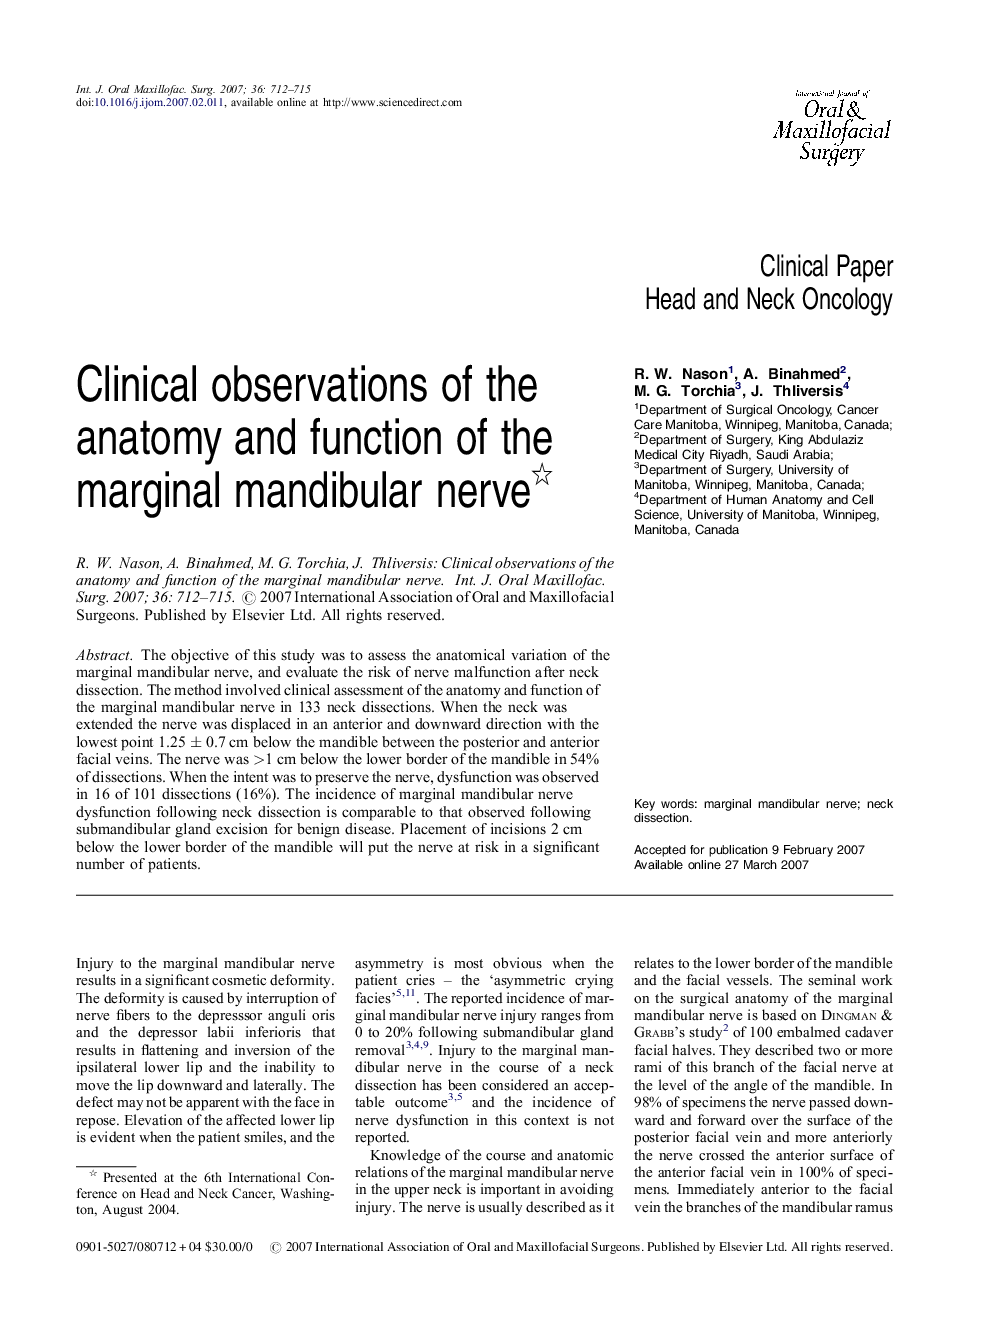 Clinical observations of the anatomy and function of the marginal mandibular nerve 